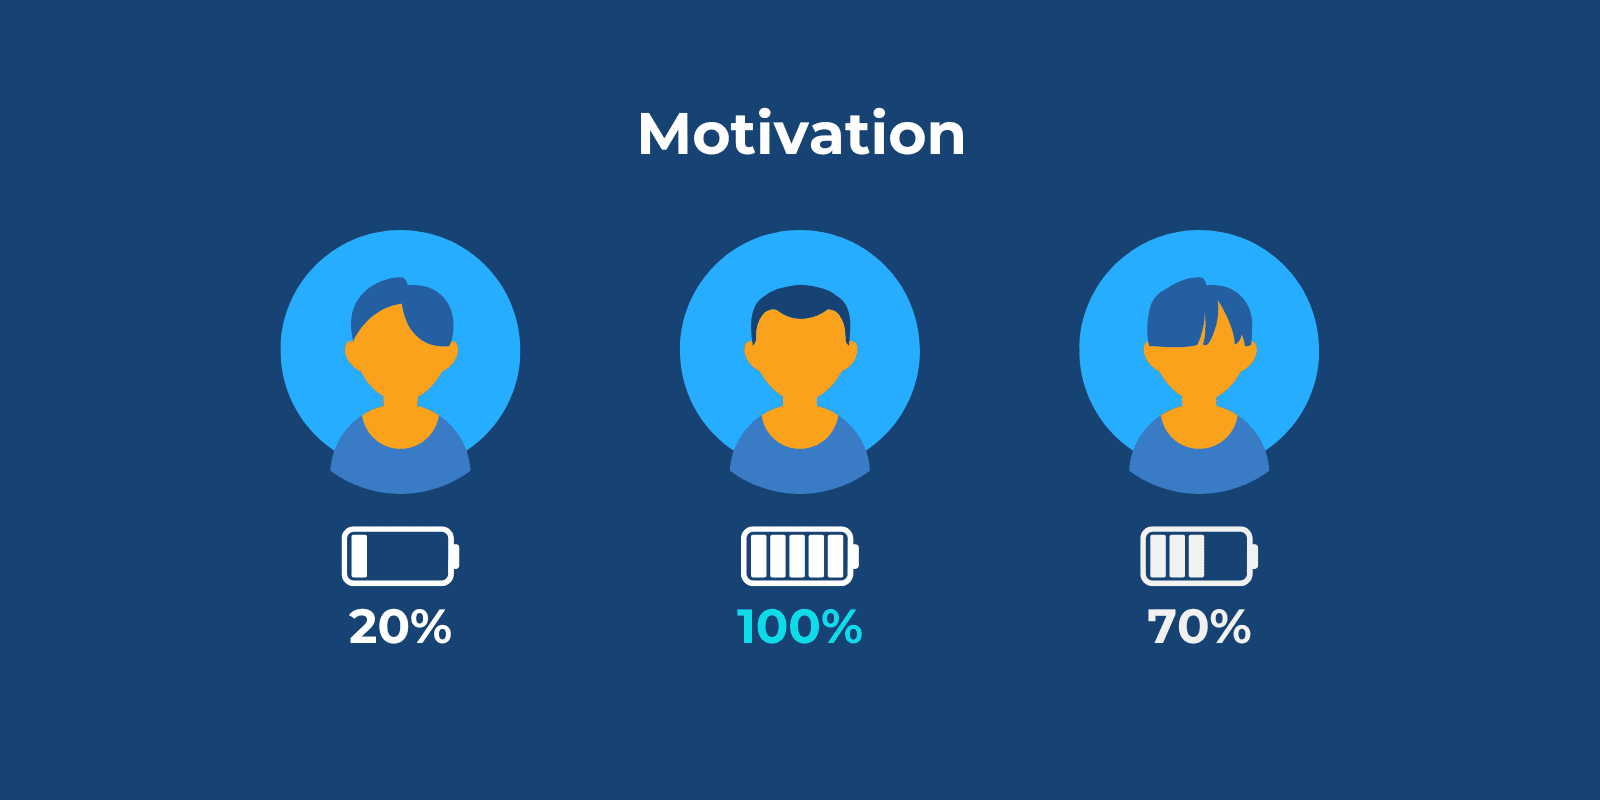 Illustration of motivation level for three people with battery that shows motivation level